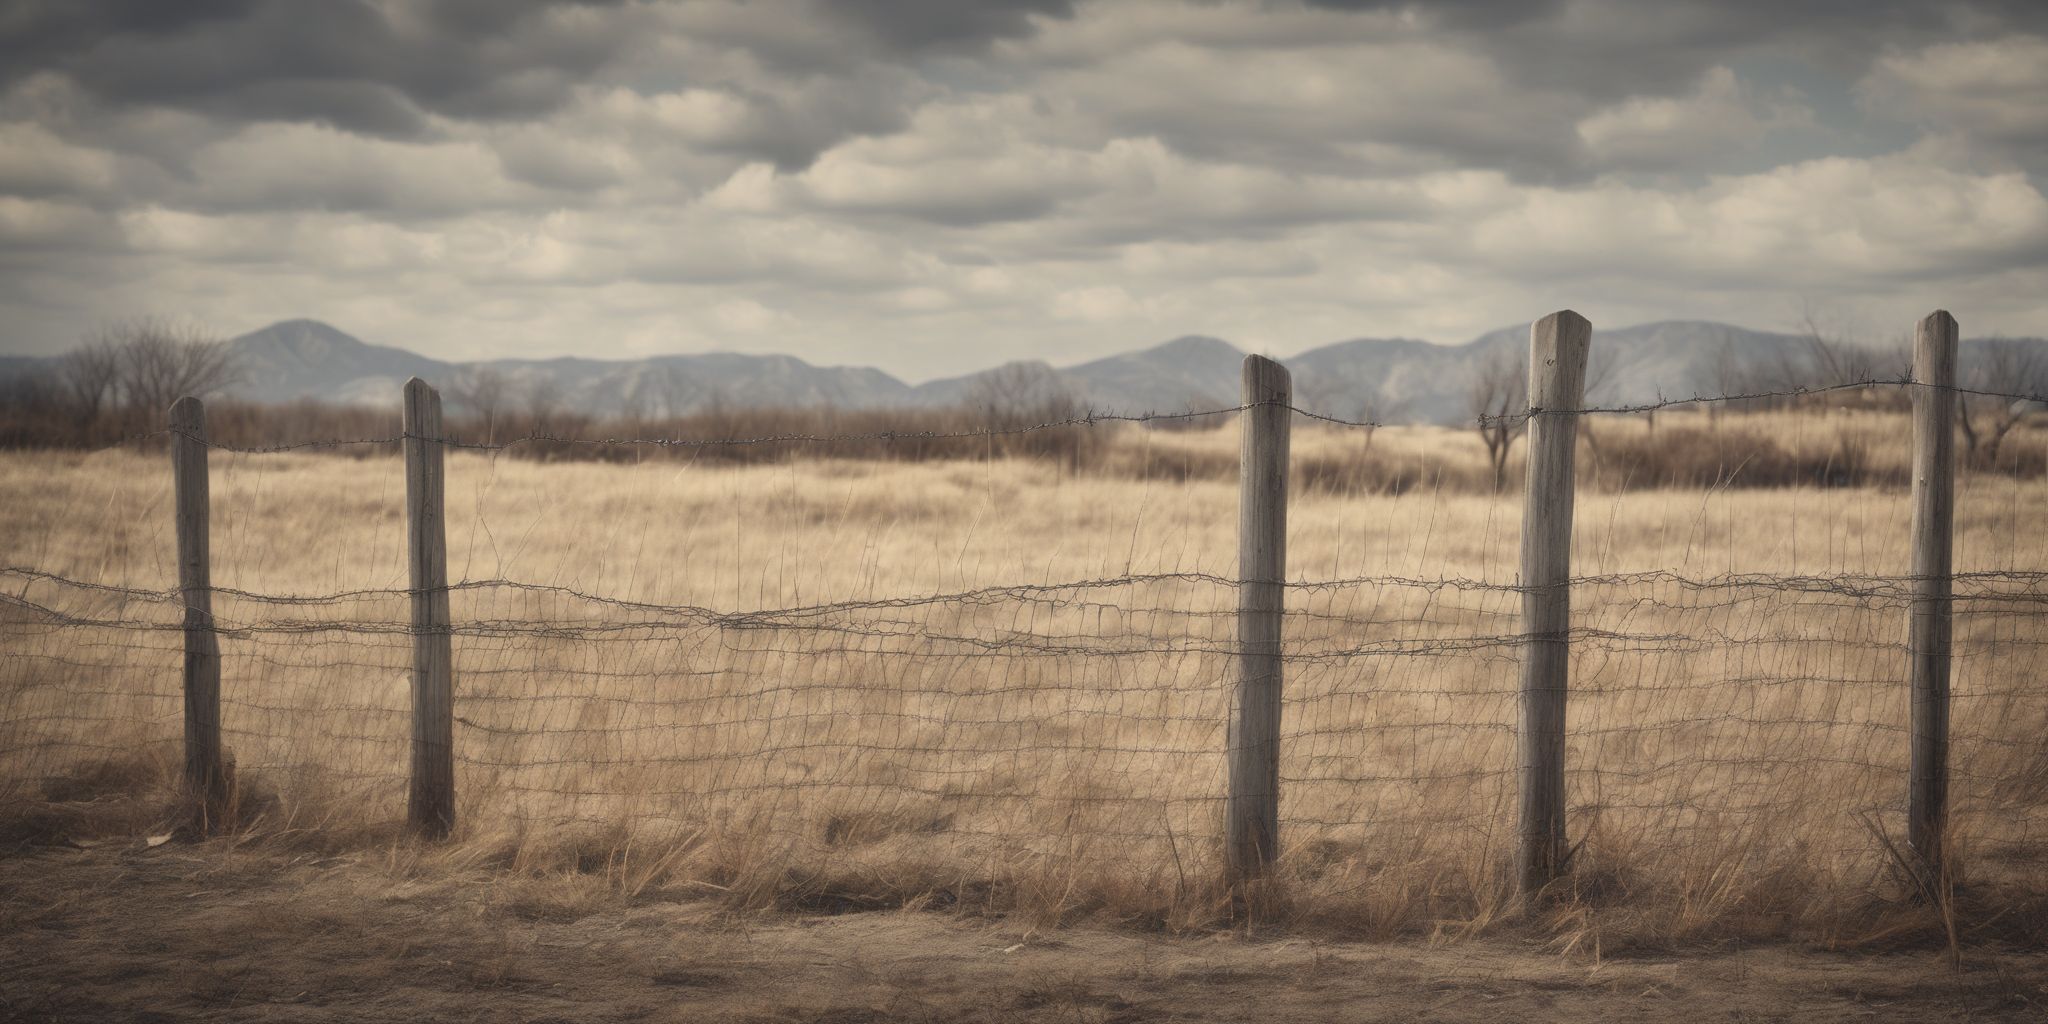 Fiscal fence  in realistic, photographic style